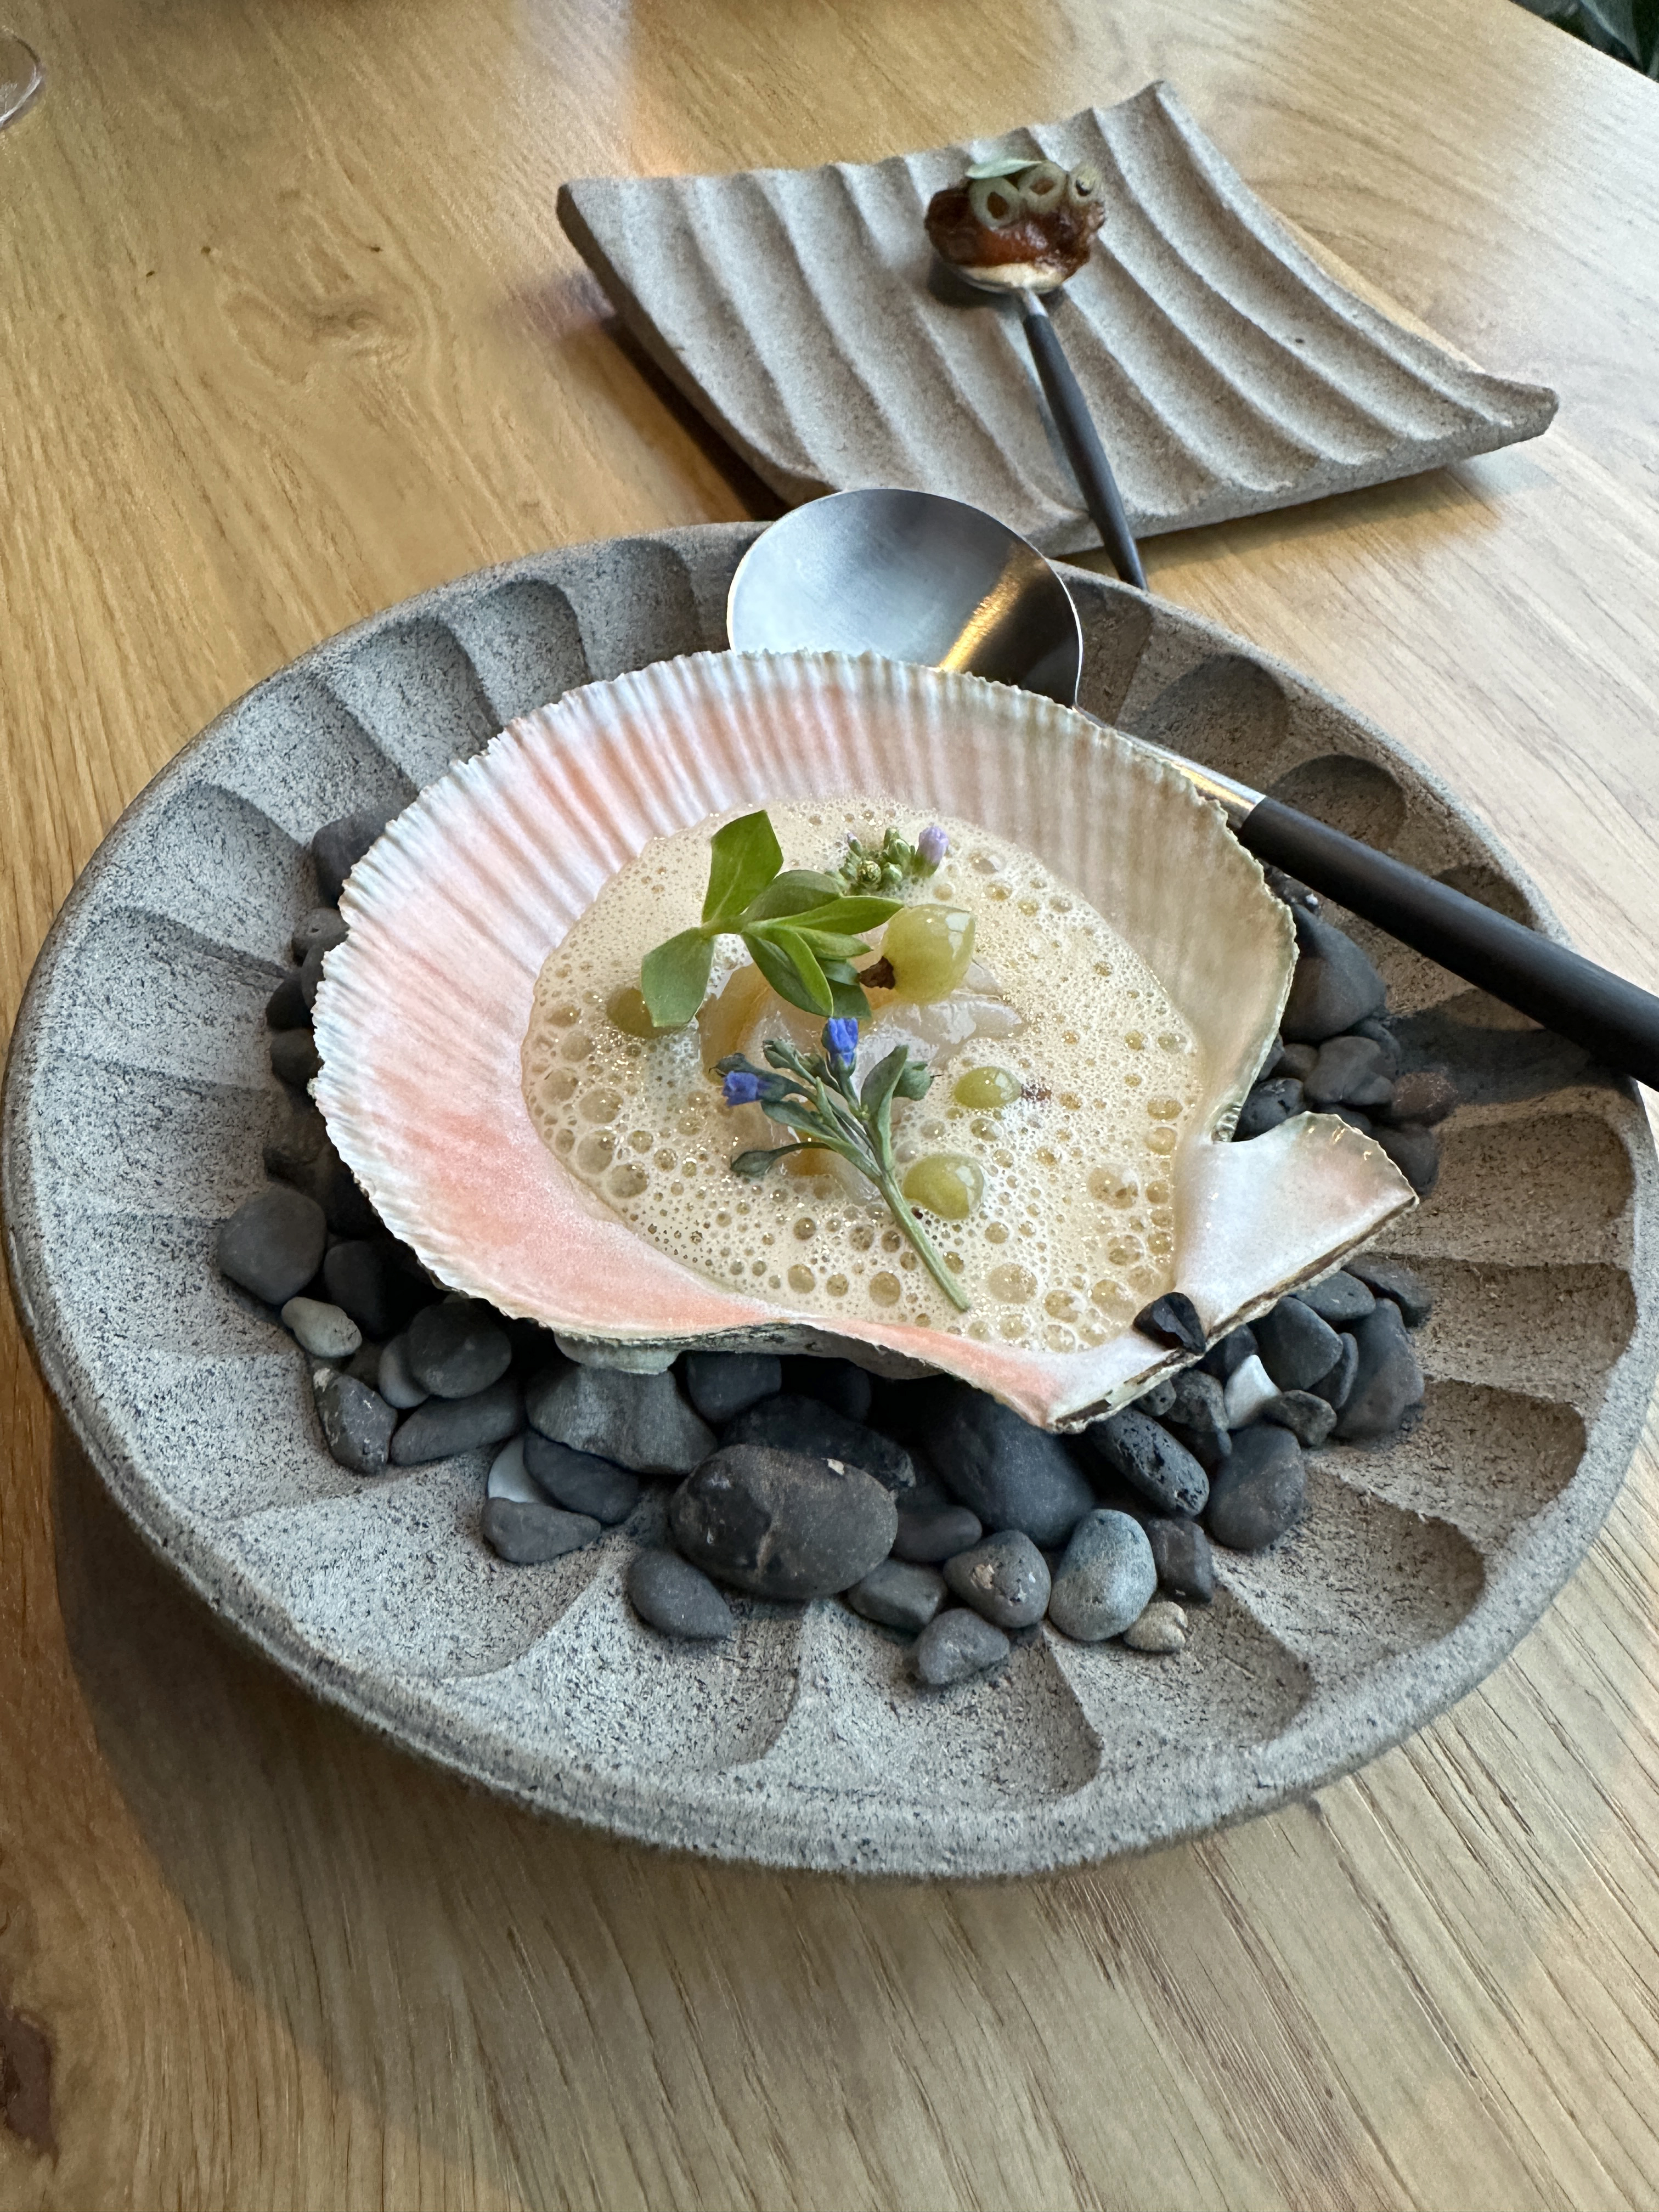 A seafood emulsion presented in a large decorative shell fringed with pink.